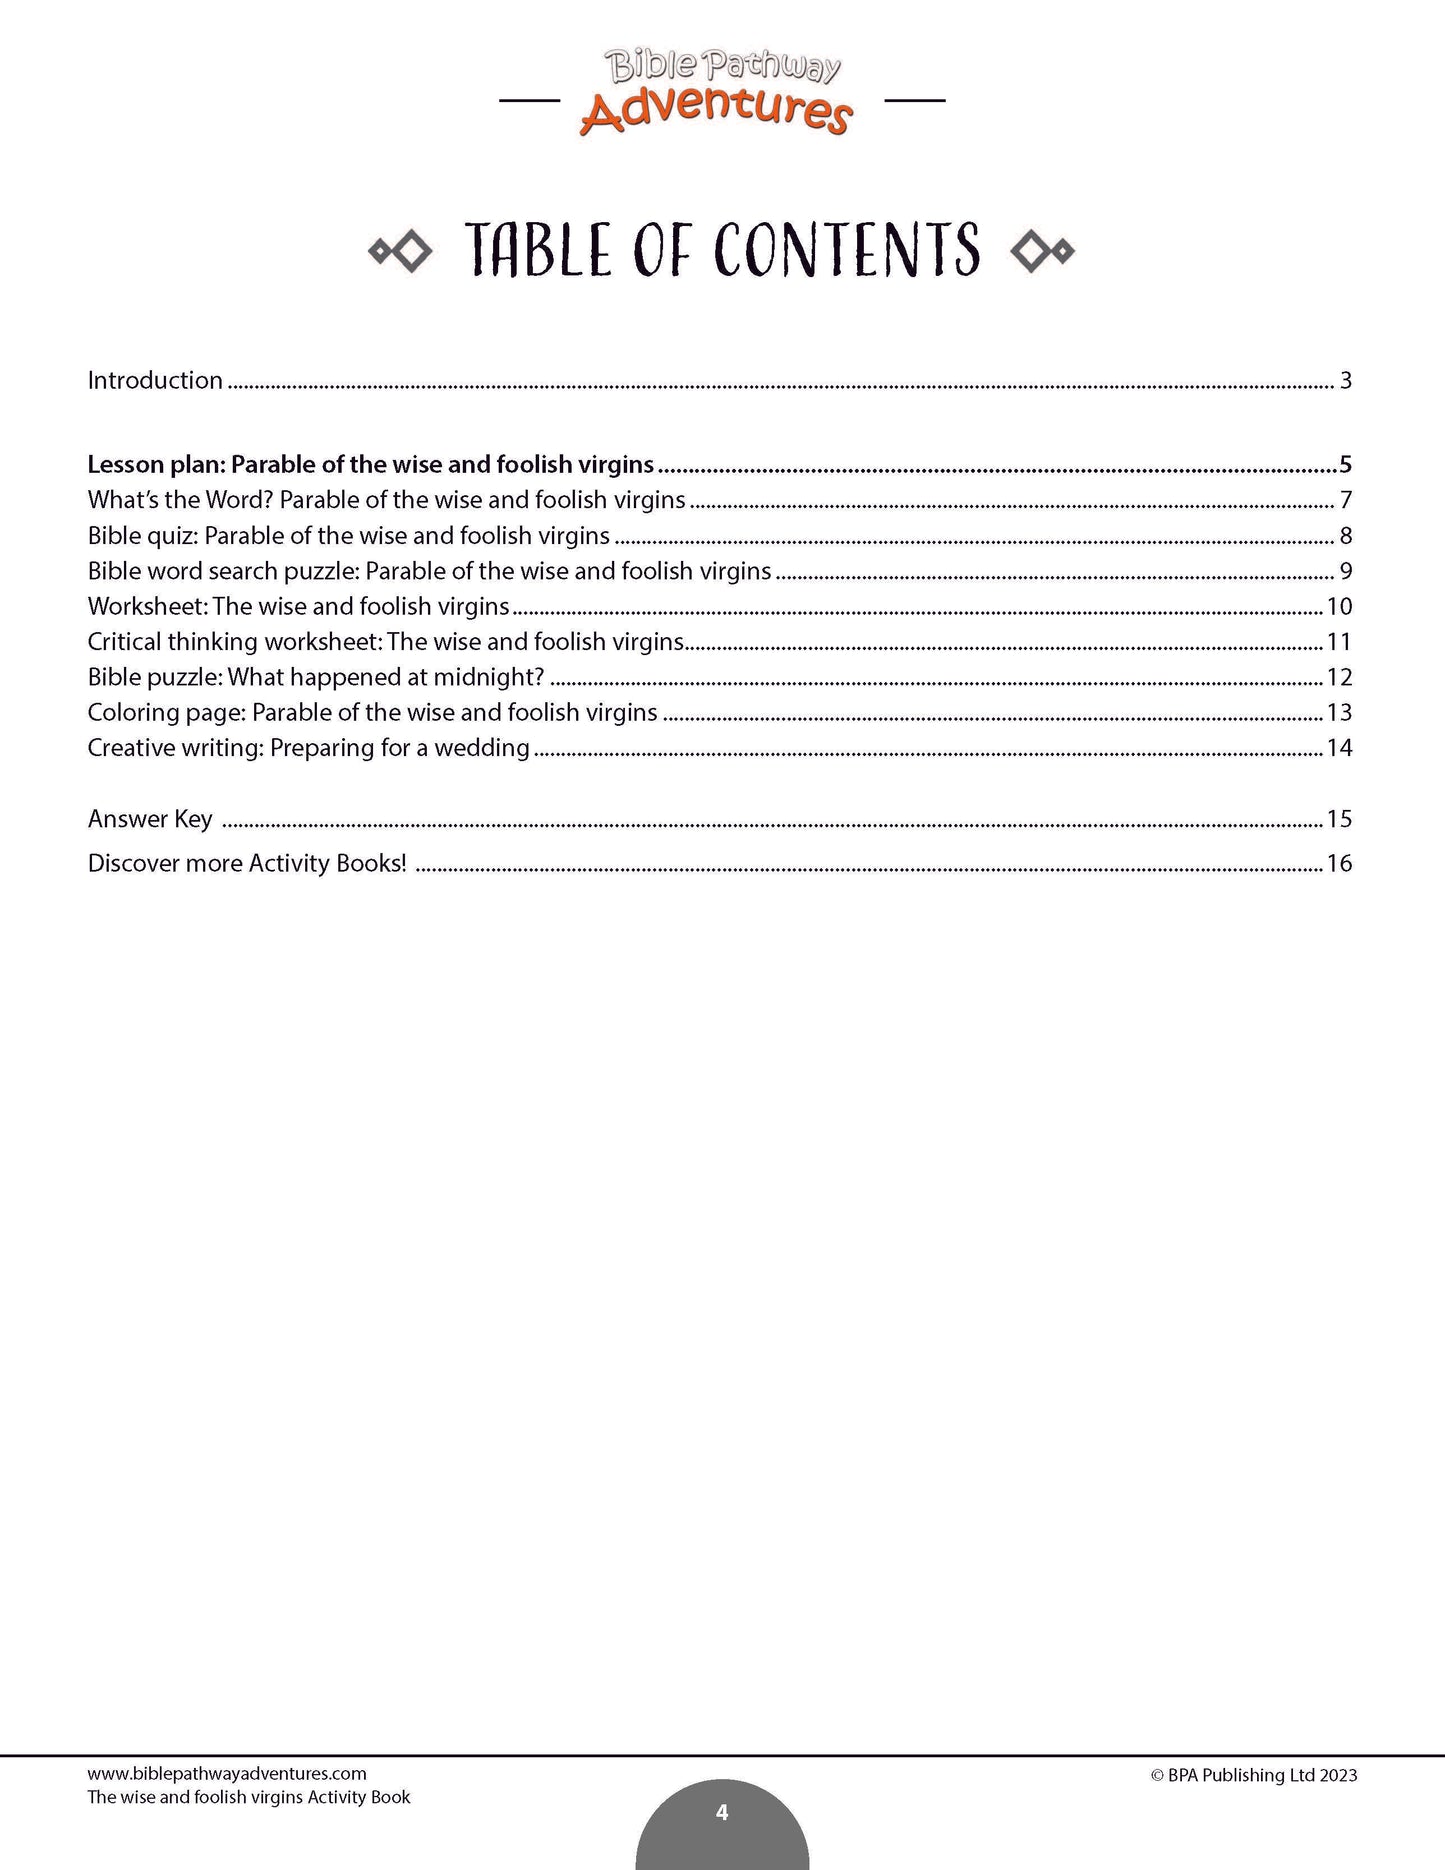 Parable of the Wise and Foolish Virgins Activity Book (PDF)